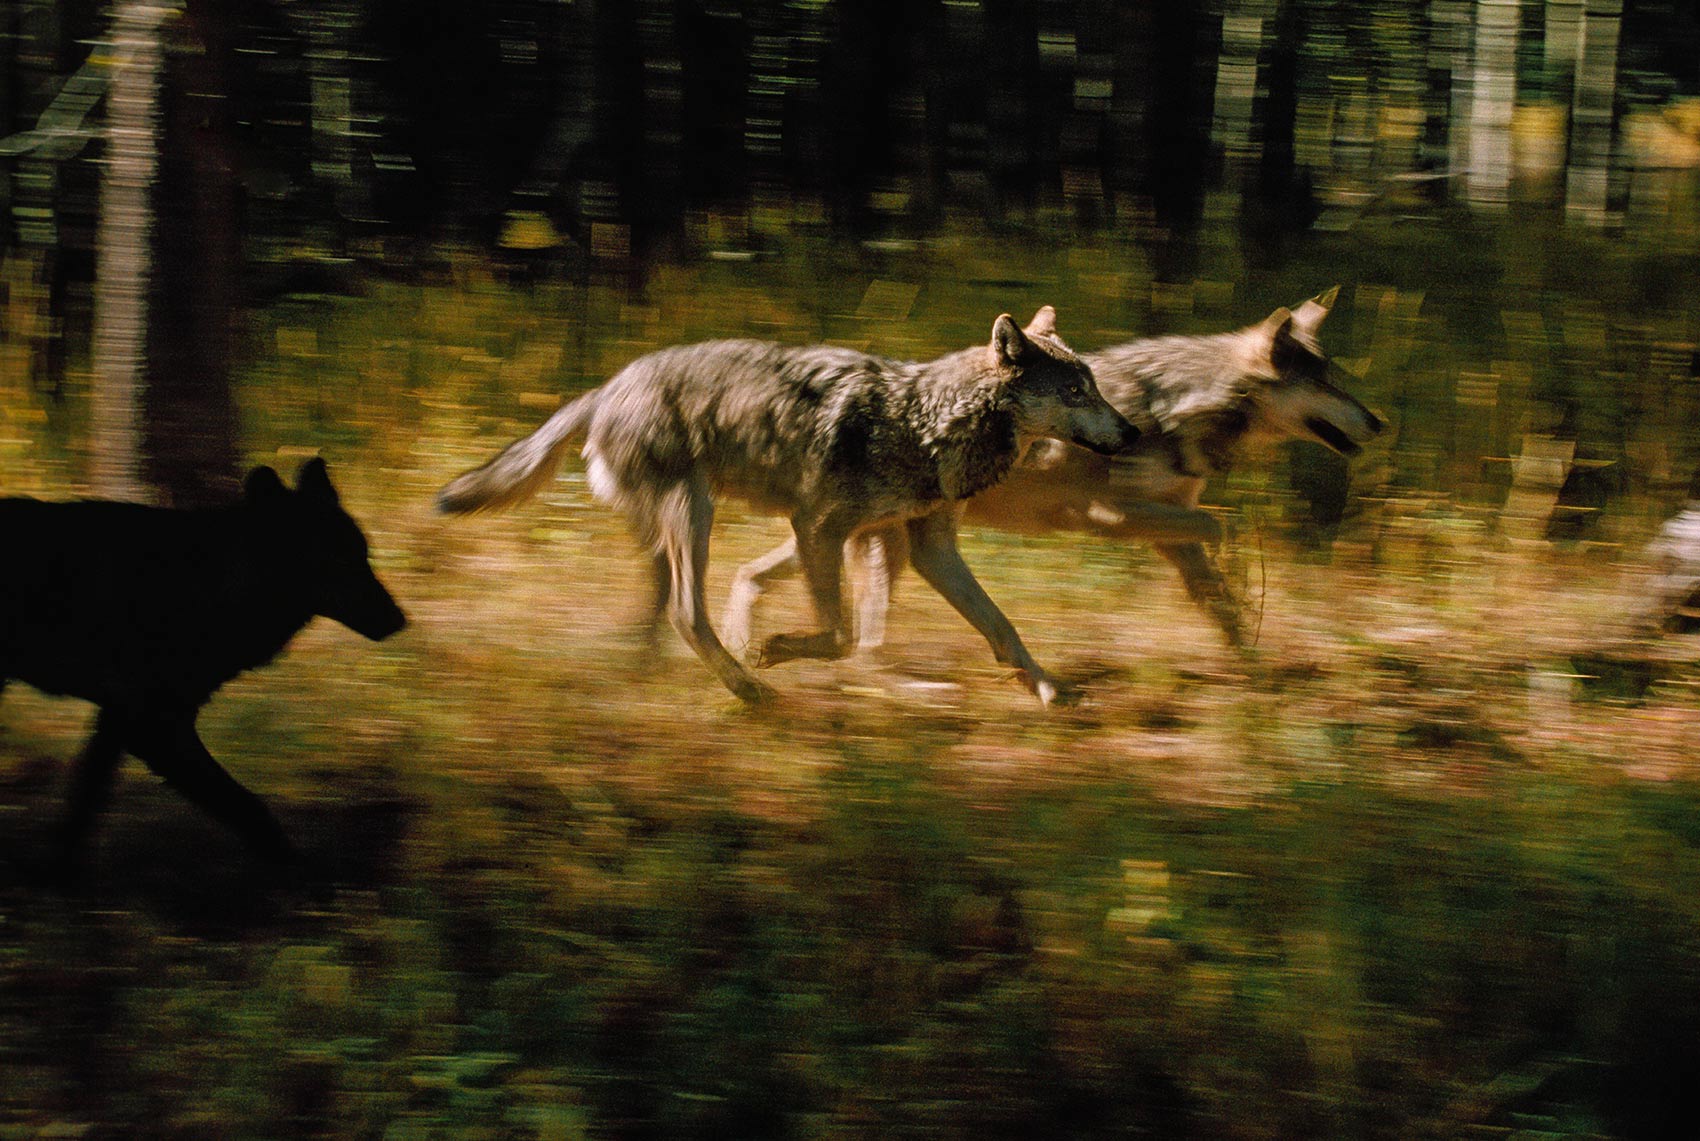 DID YOU KNOW? Killing wolves has unexpected consequences.